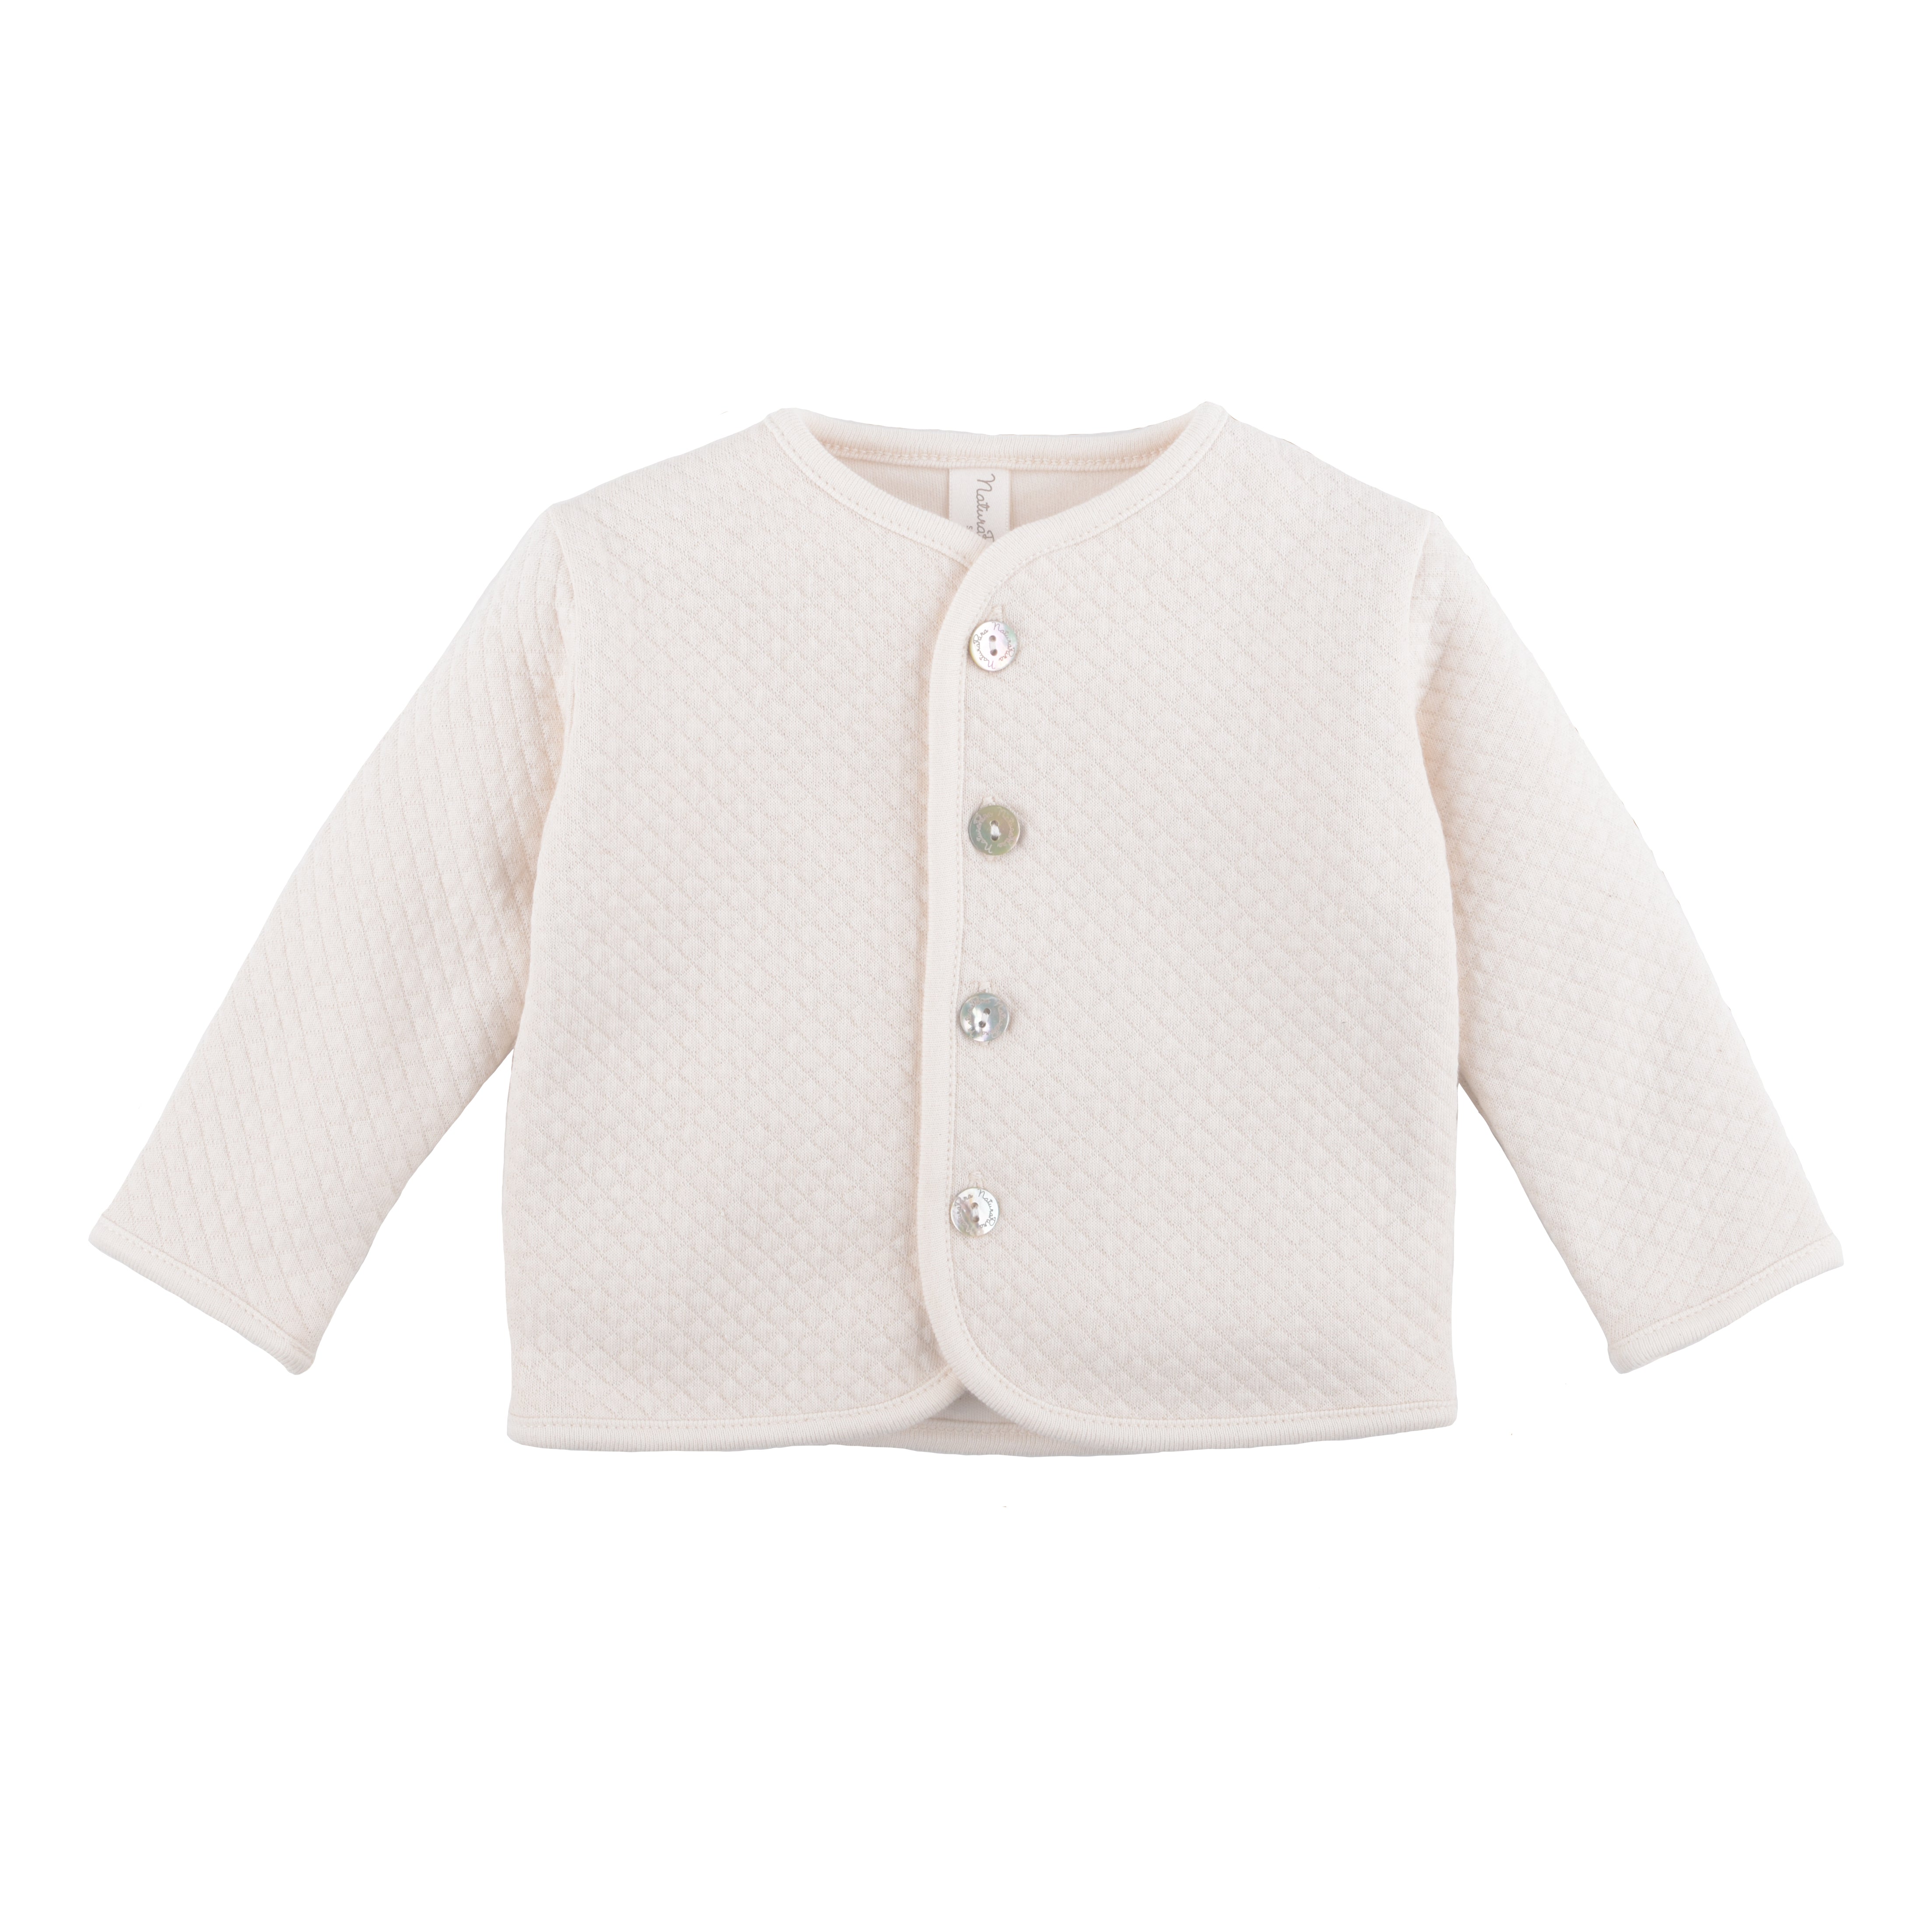 JACQUARD FLEECE JACKET WITH MOTHER OF PEARL BUTTONS